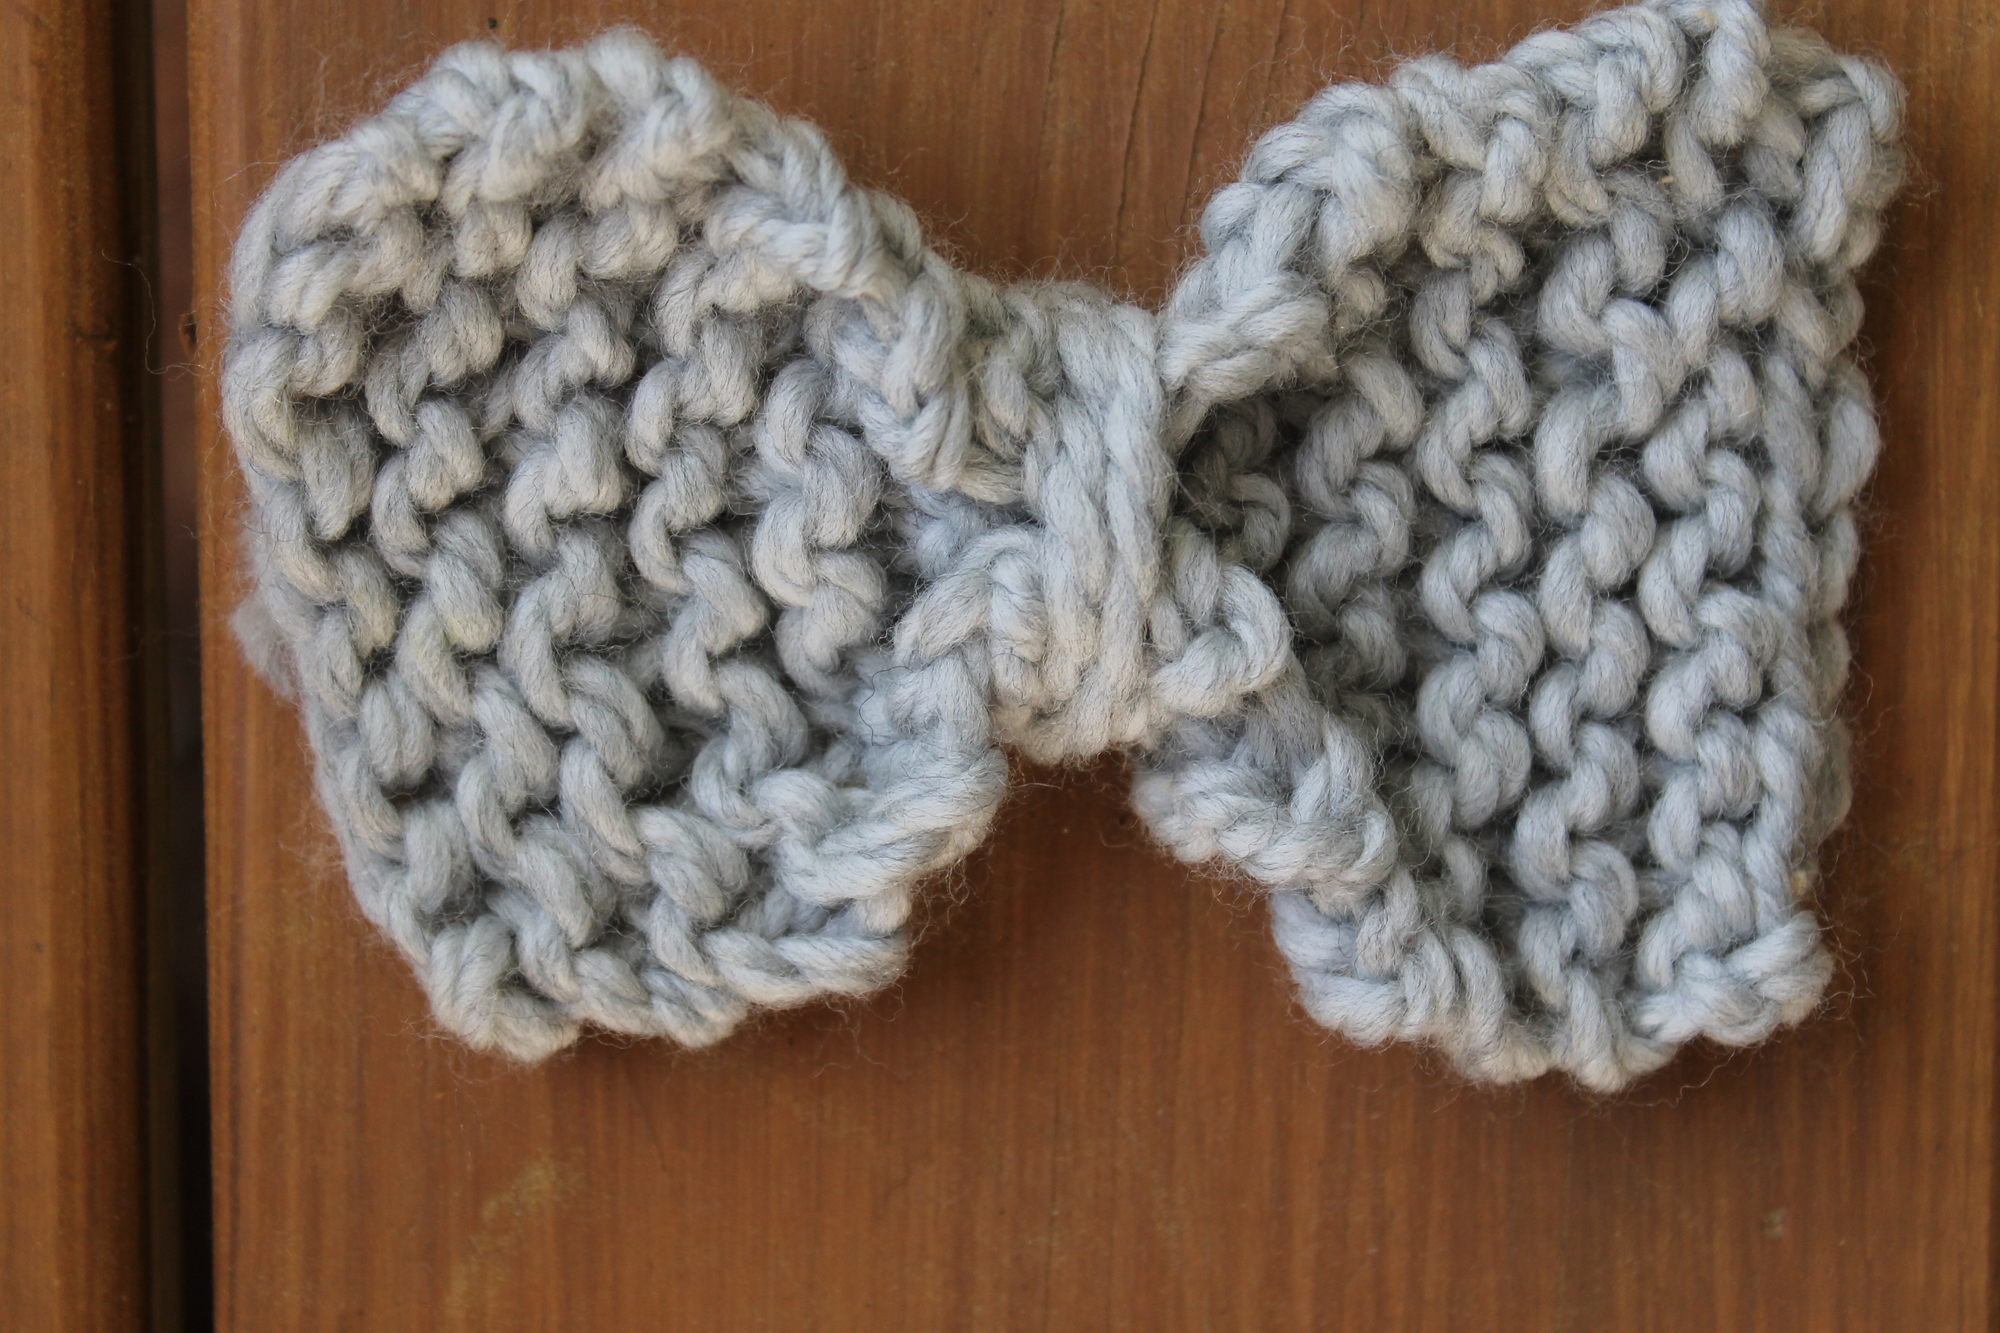 Wrapping yarn around a knit bow